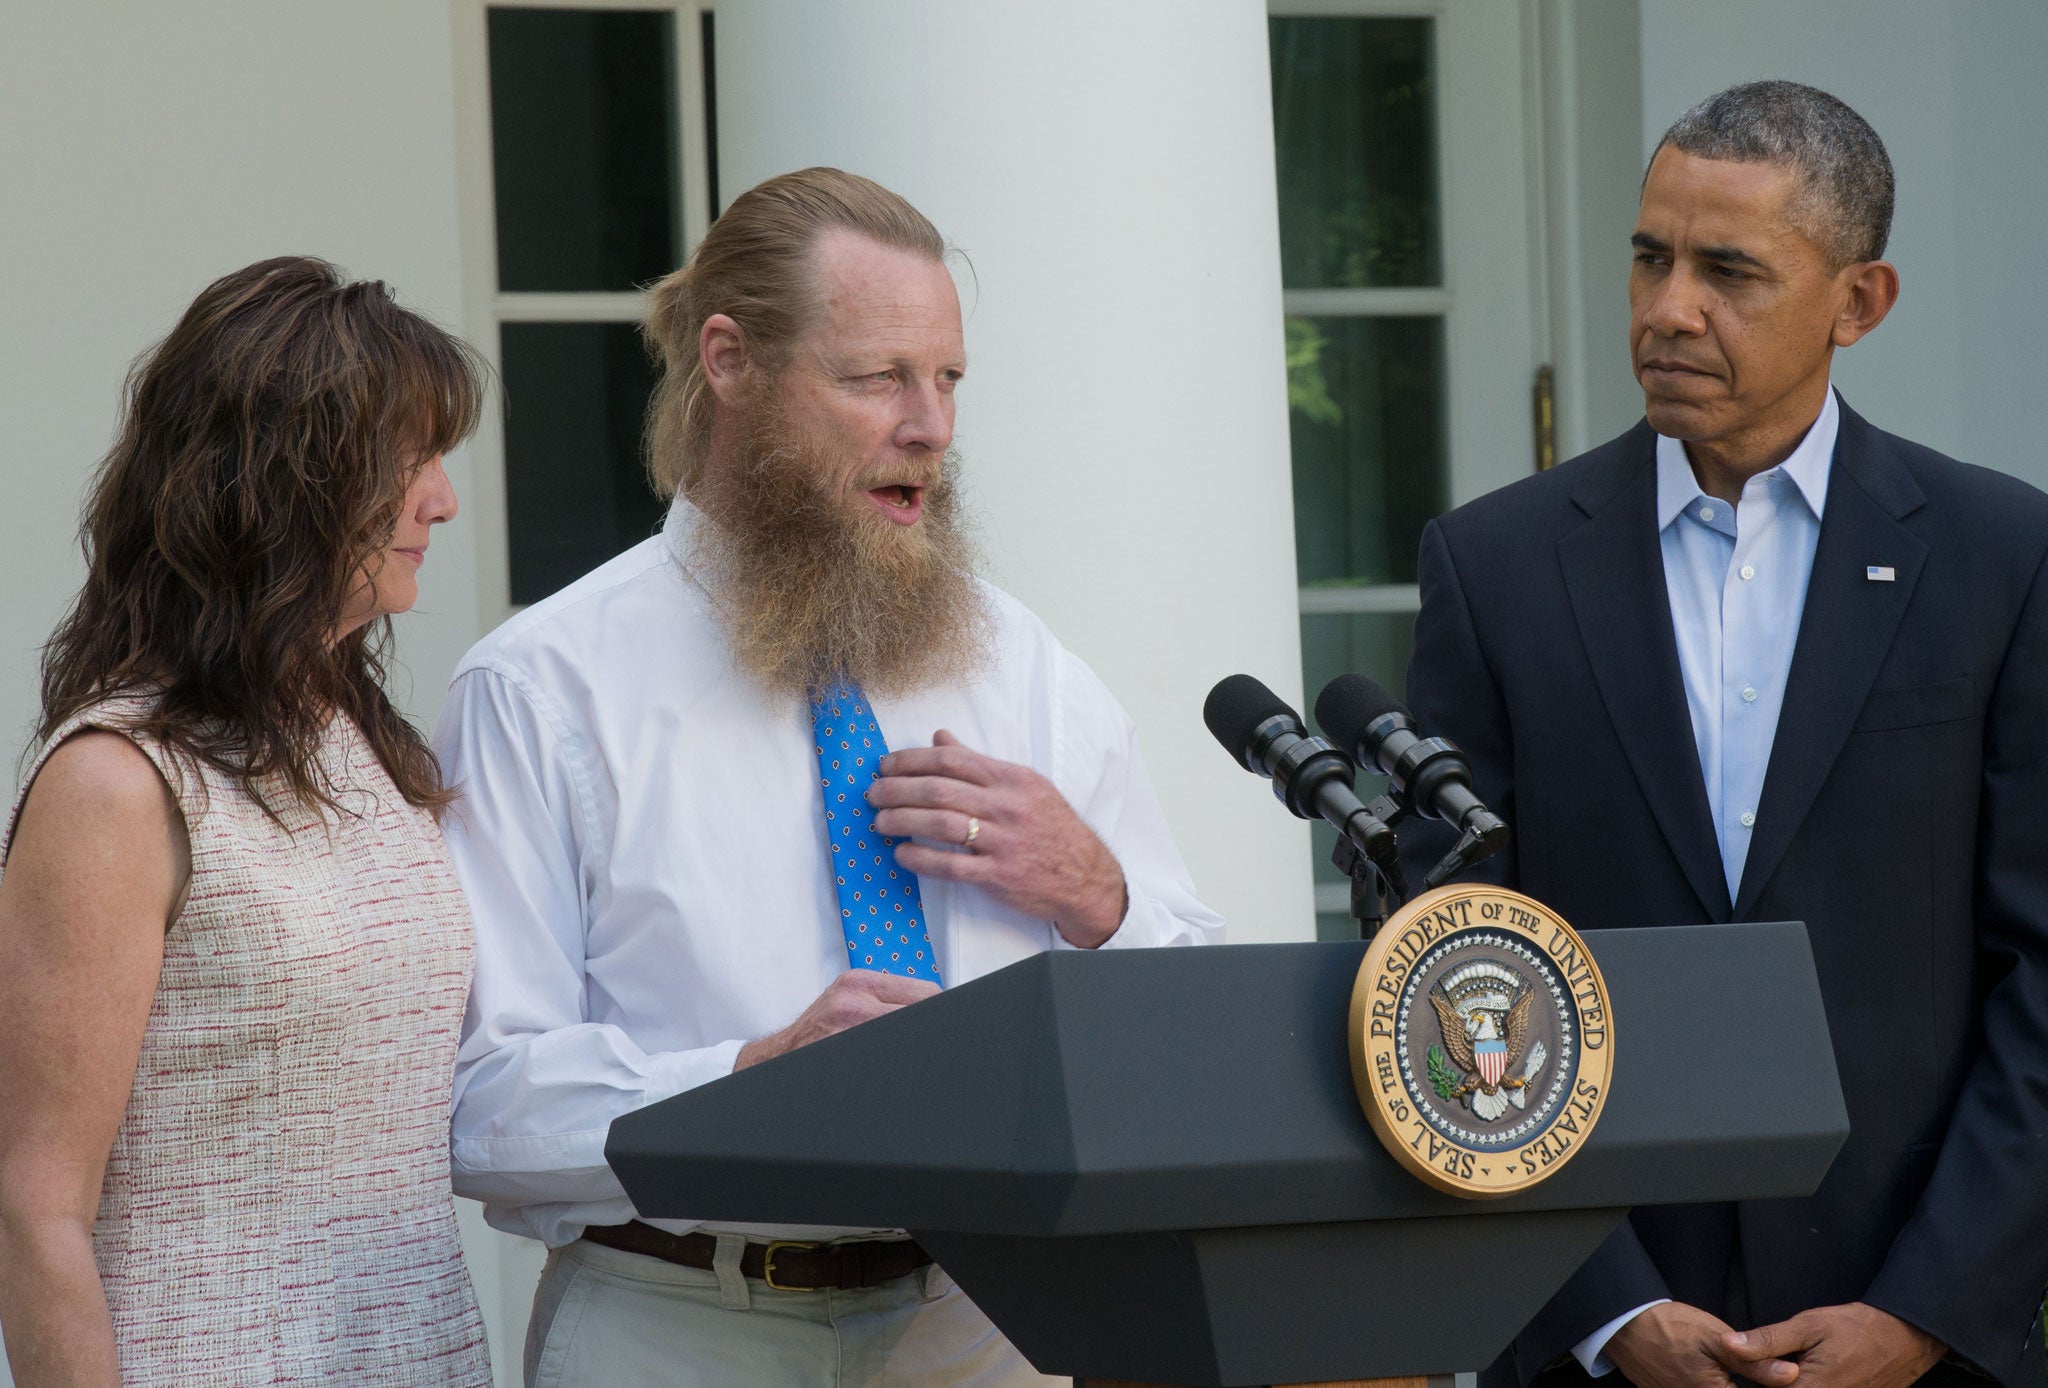 Robert Bergdahl makes a statement about the release of his son Sgt Bowe Bergdahl as his wife, Jani Bergdahl and President Barack Obama listen in the Rose Garden at the White House